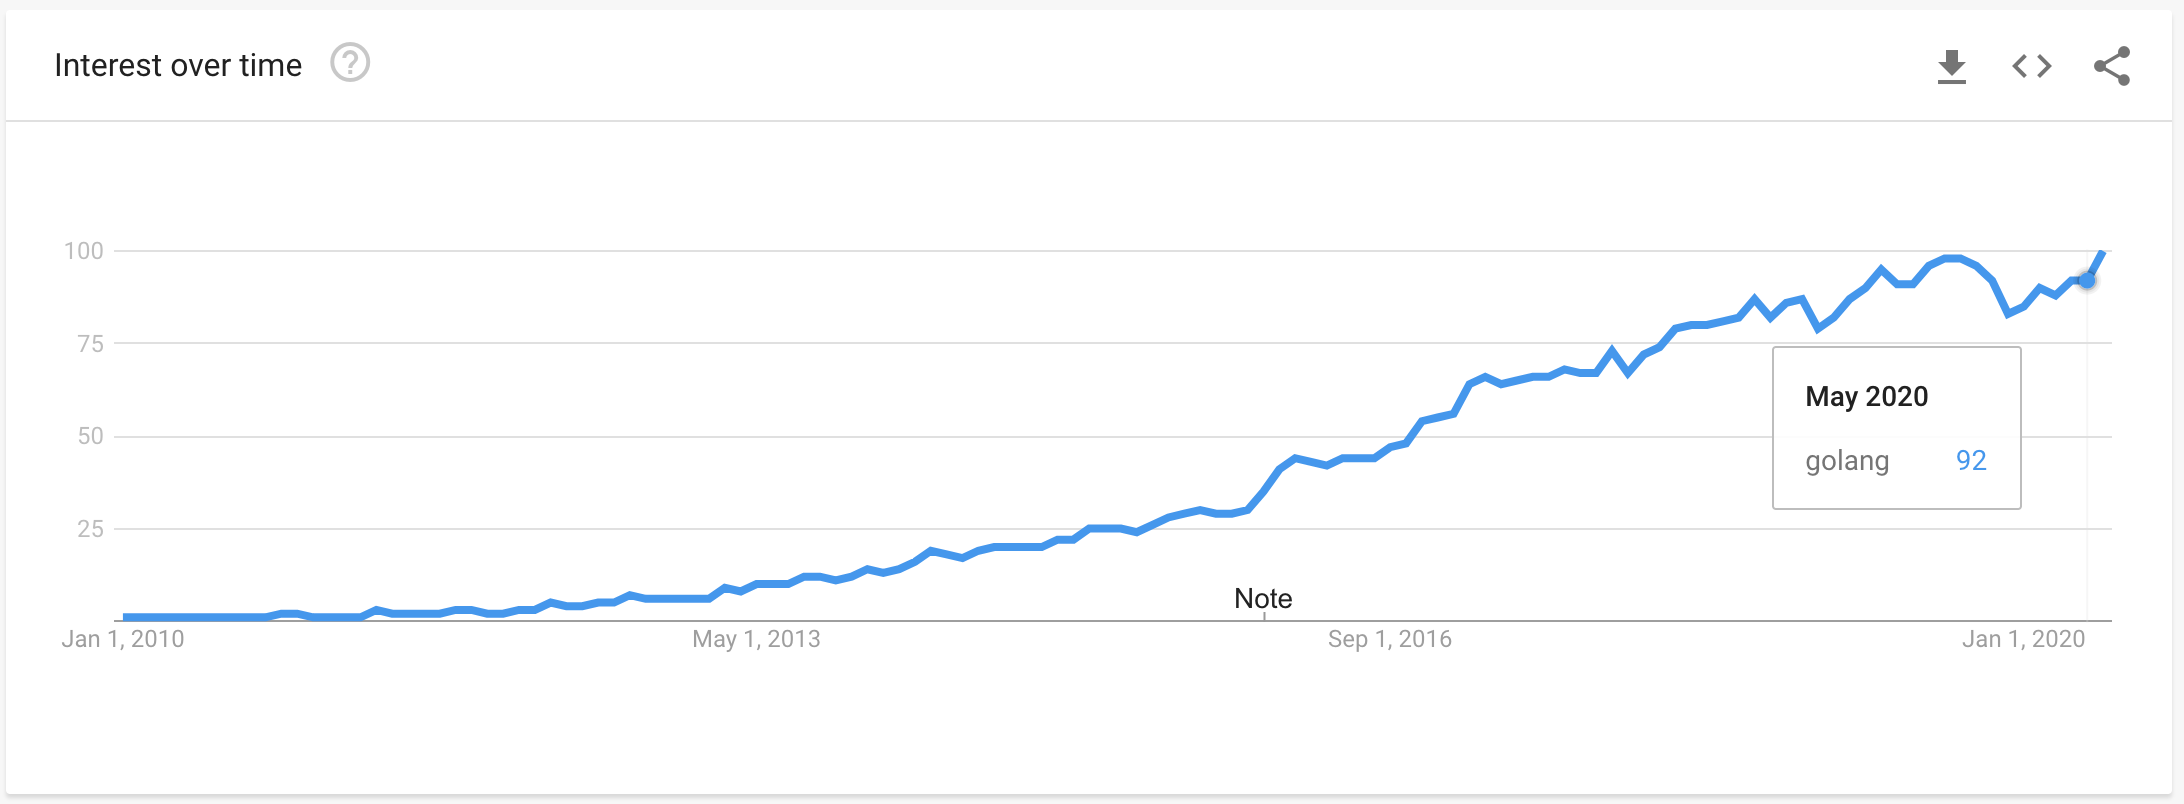 Google Trends data for "golang" from 2010 to 2020